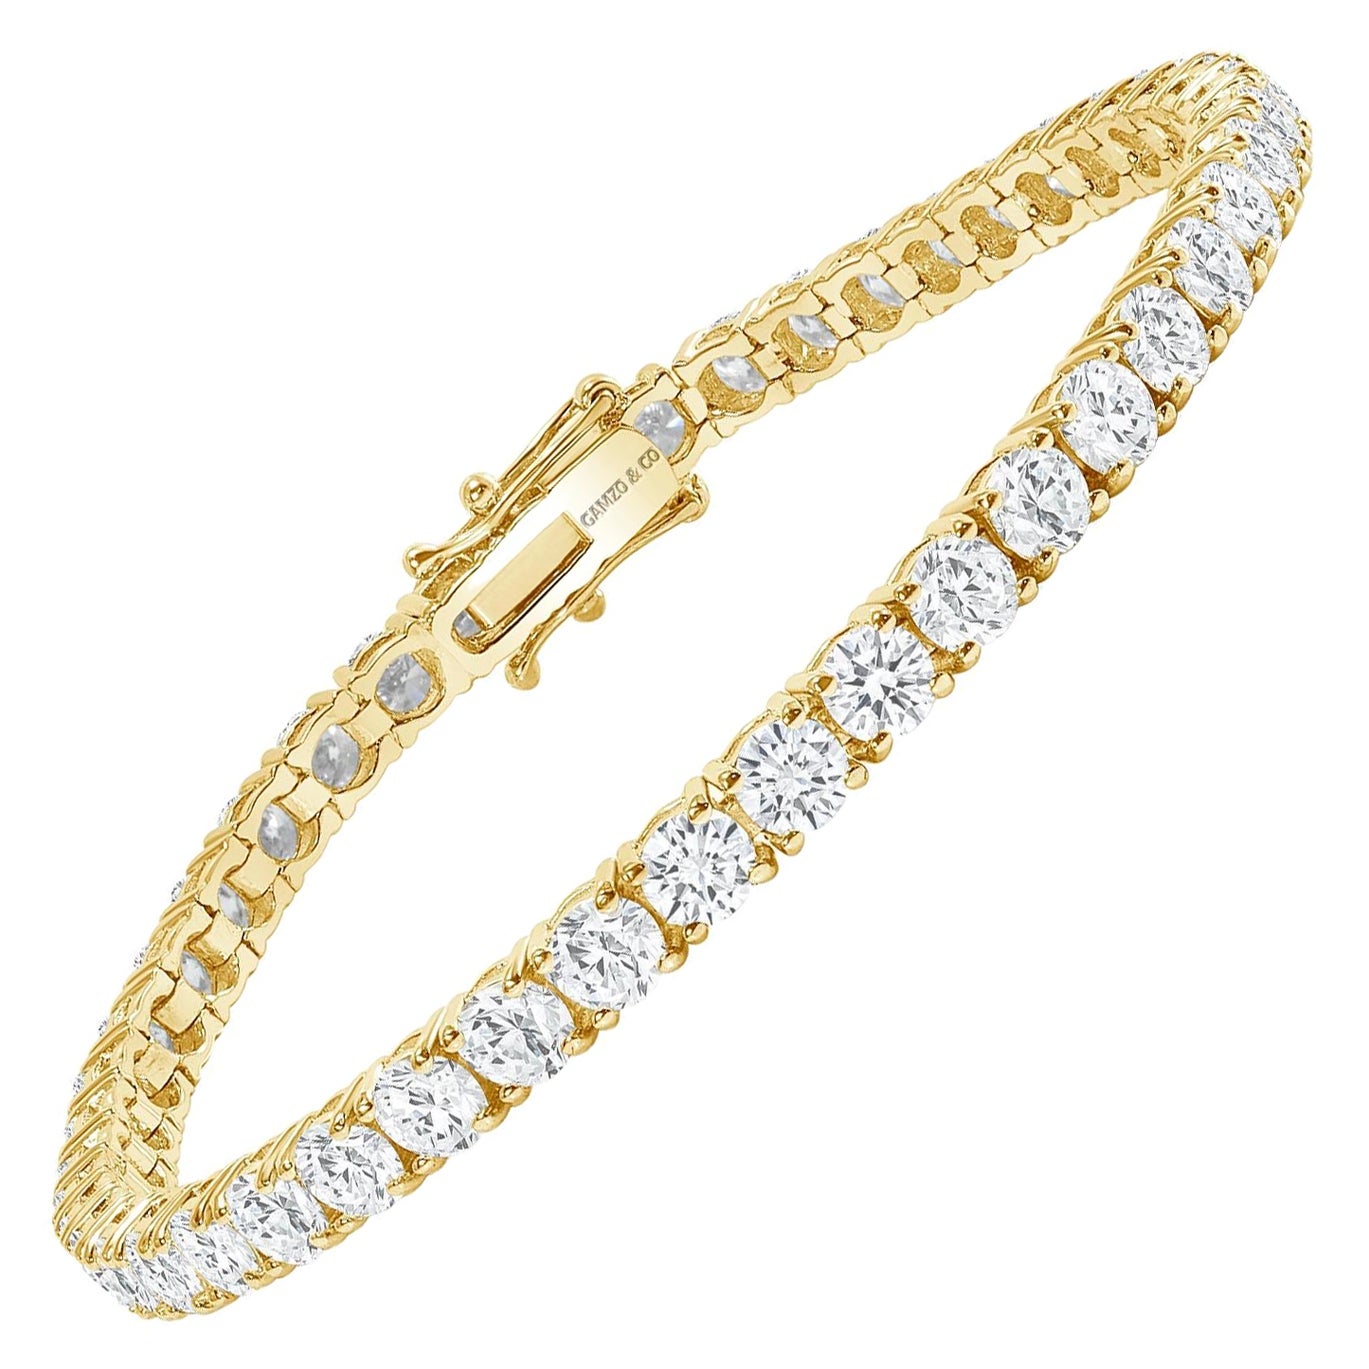 7 Inches 14K Yellow Gold 4 Prong 12 Carat Round Diamond Tennis Bracelet For Sale